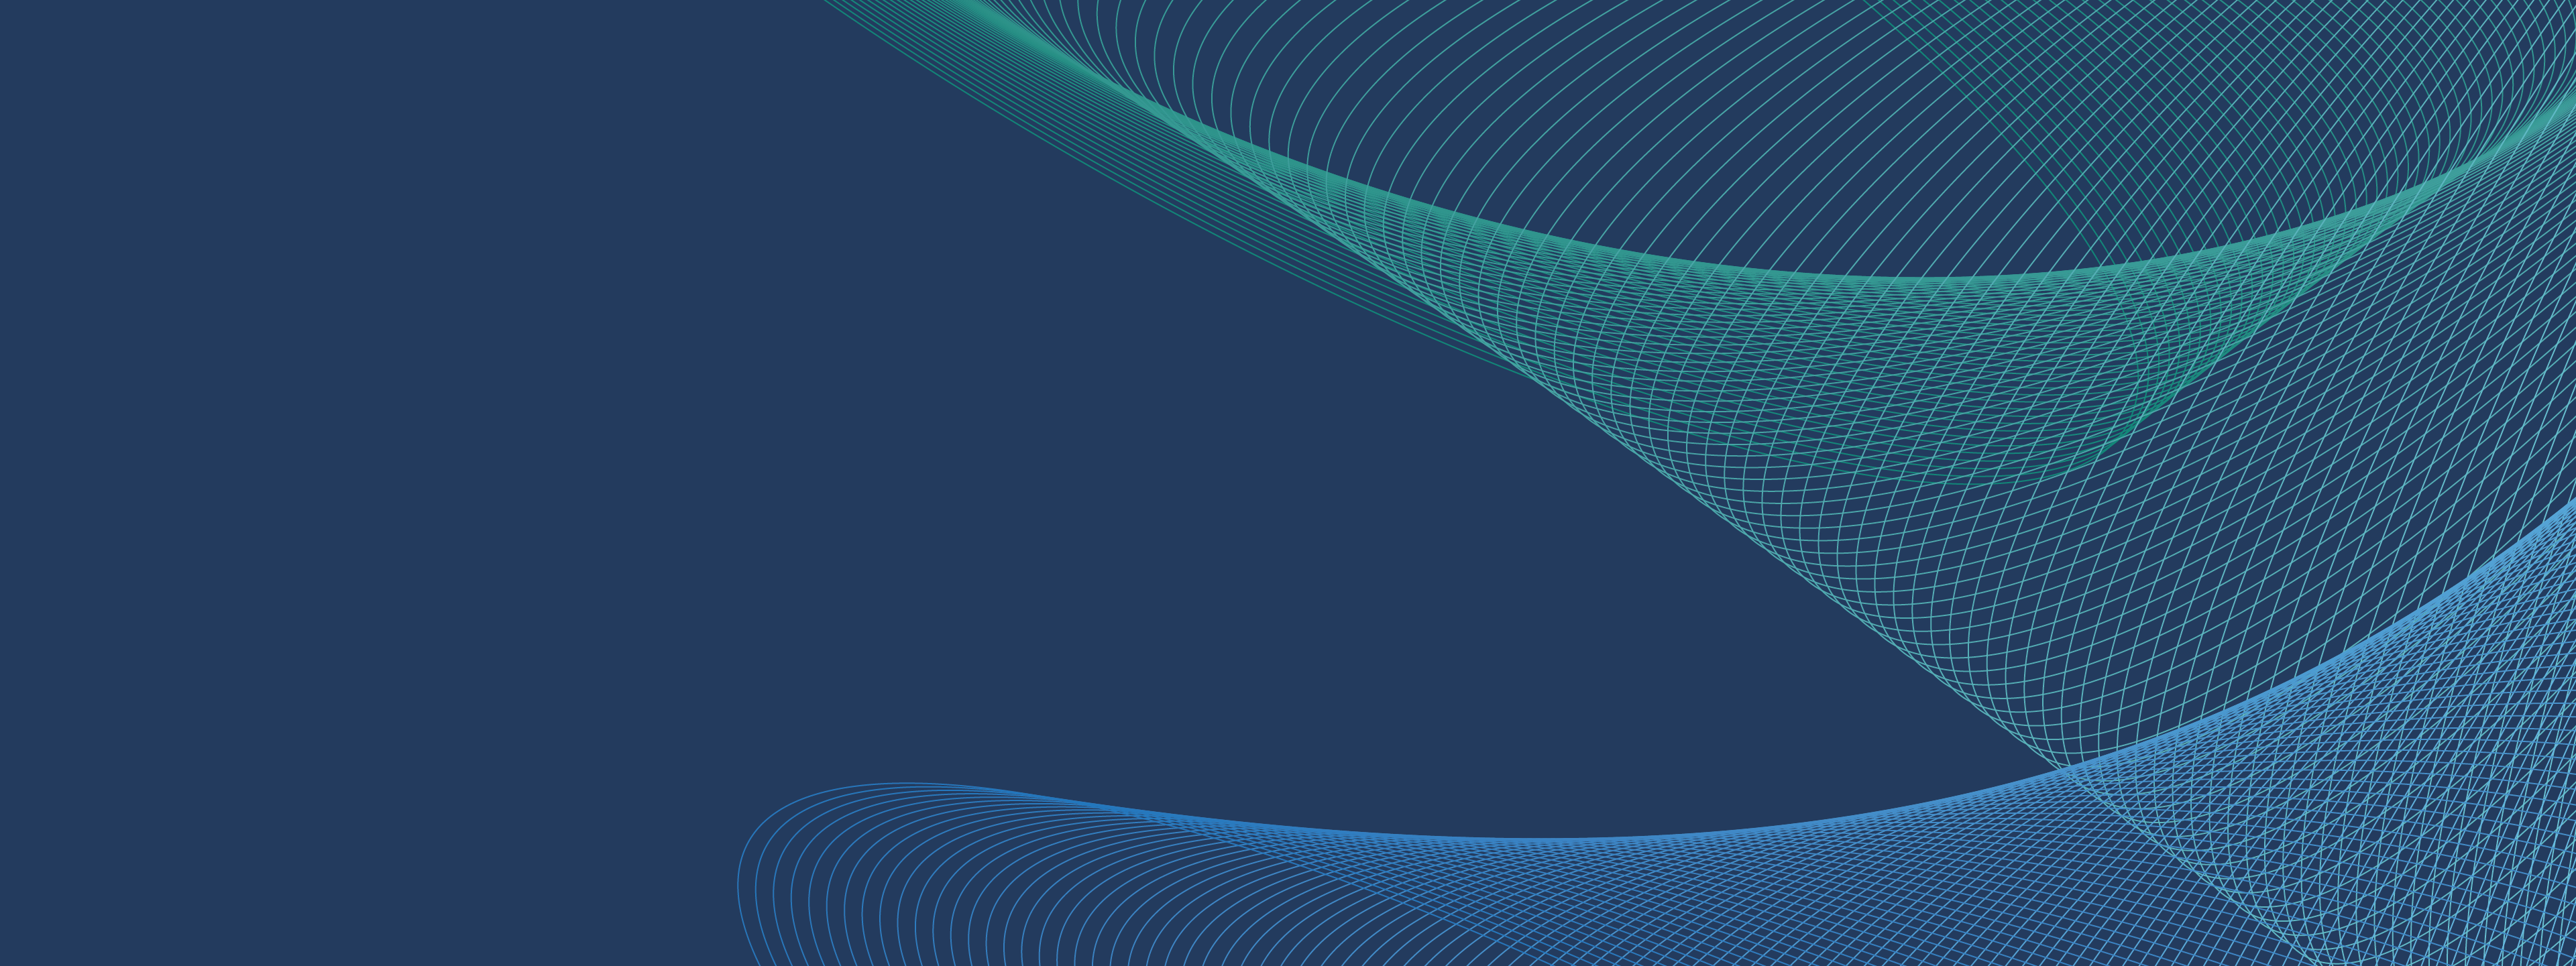 illustration of a green net on a dark blue background